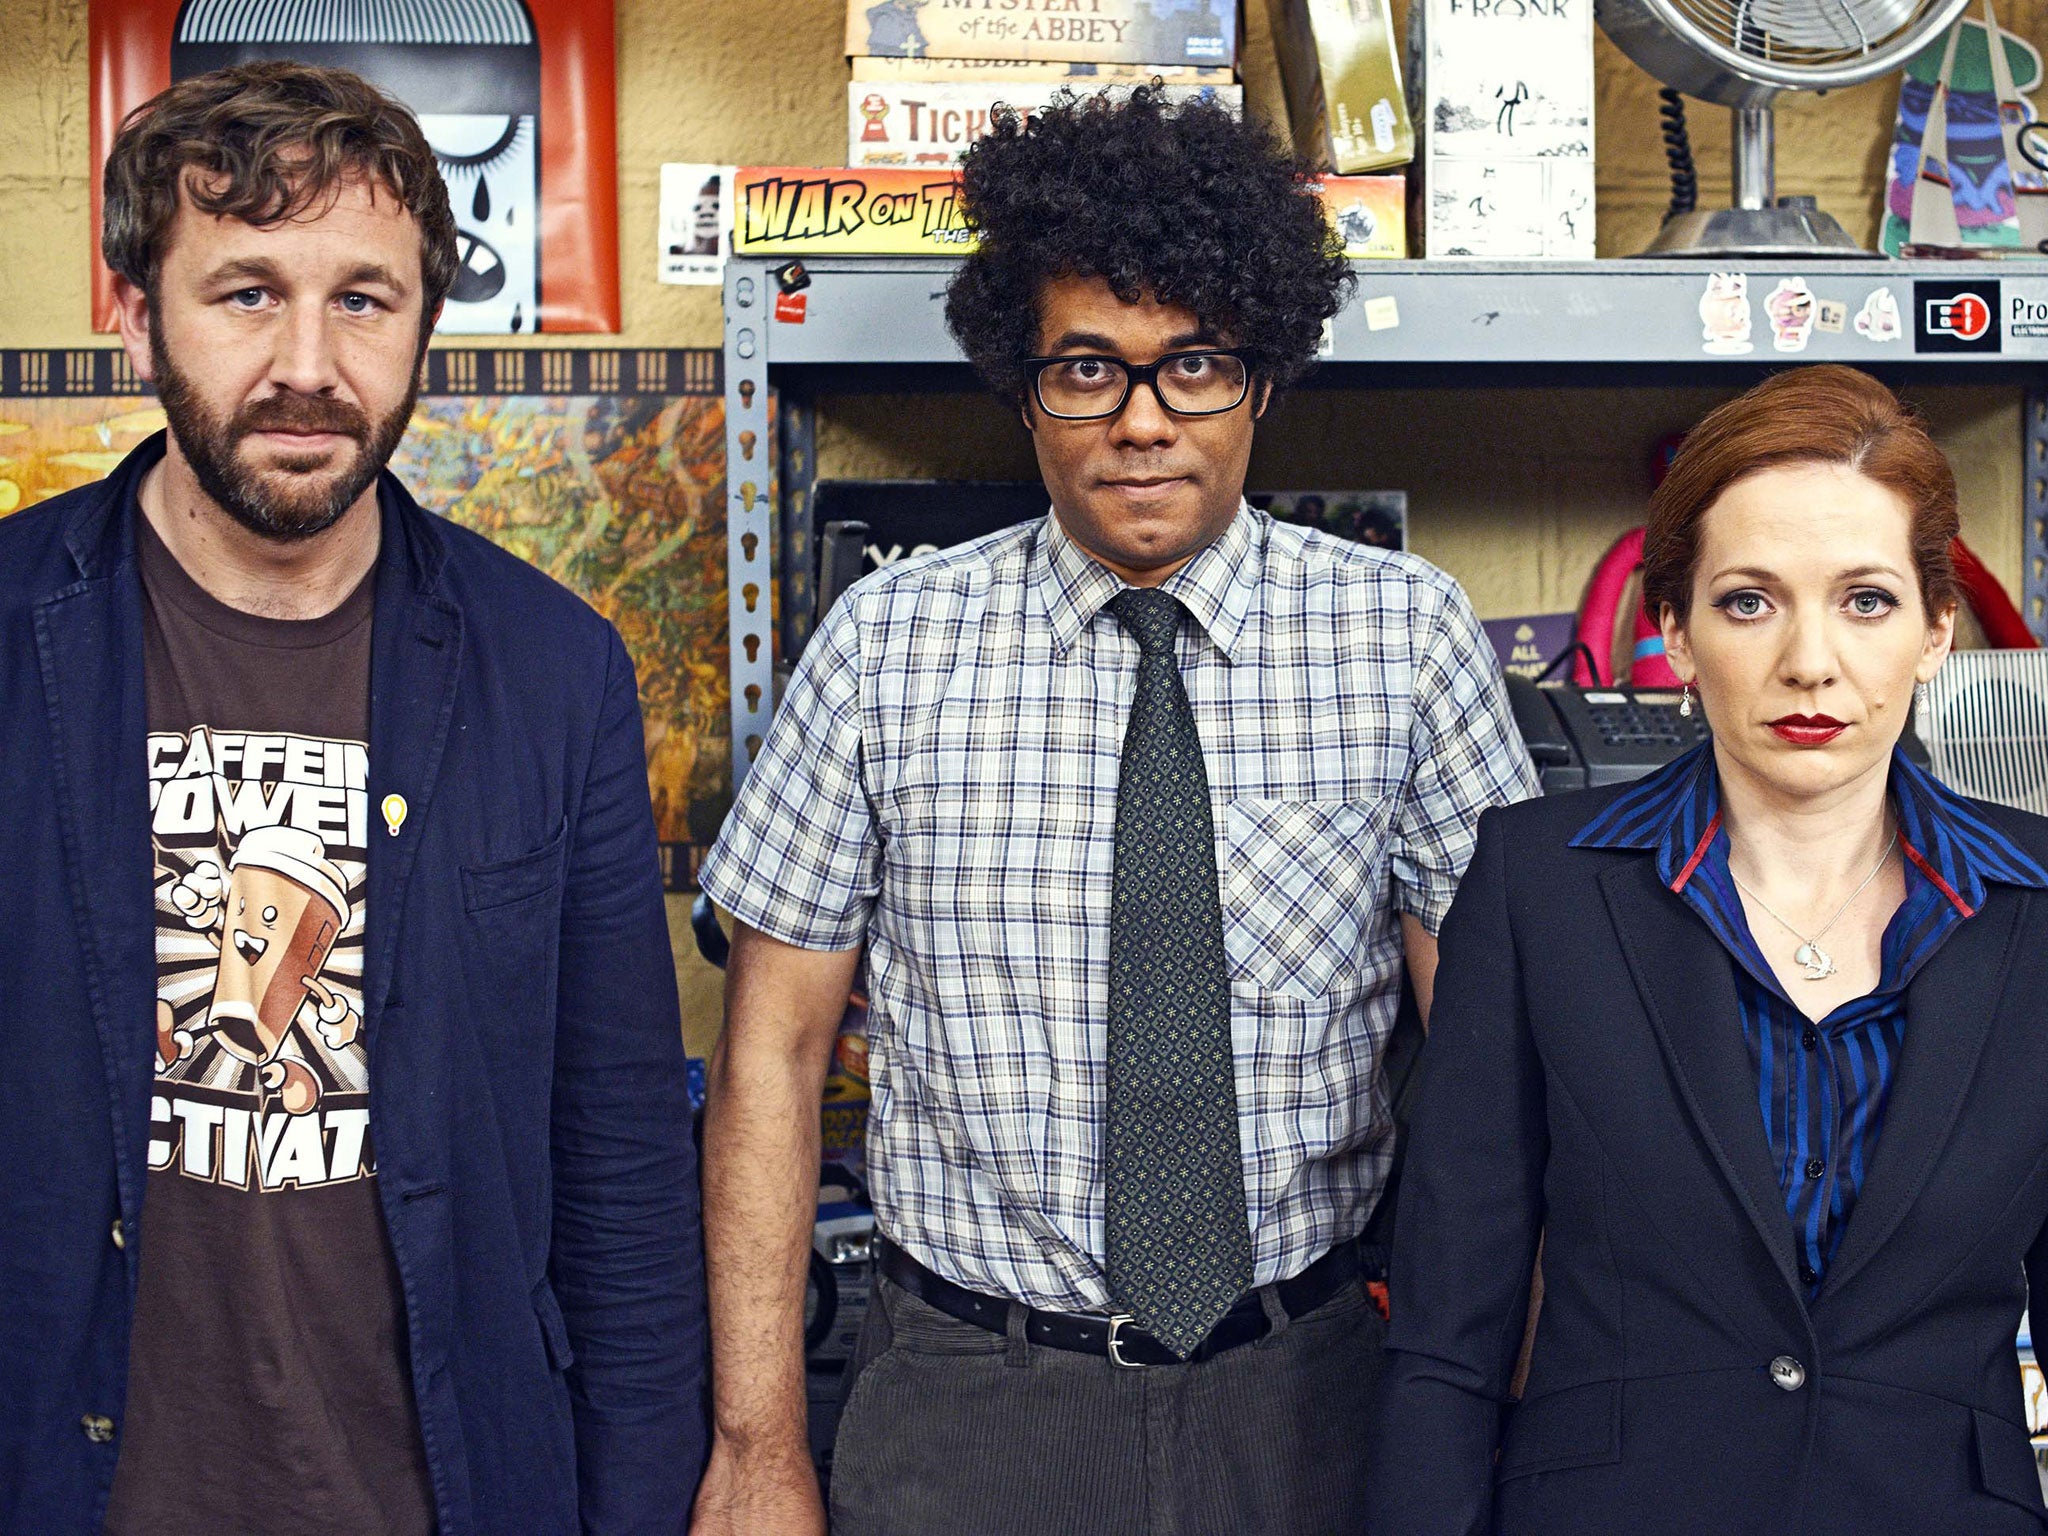 Chris O’Dowd, Richard Ayoade and Katherine Parkinson star in The IT Crowd